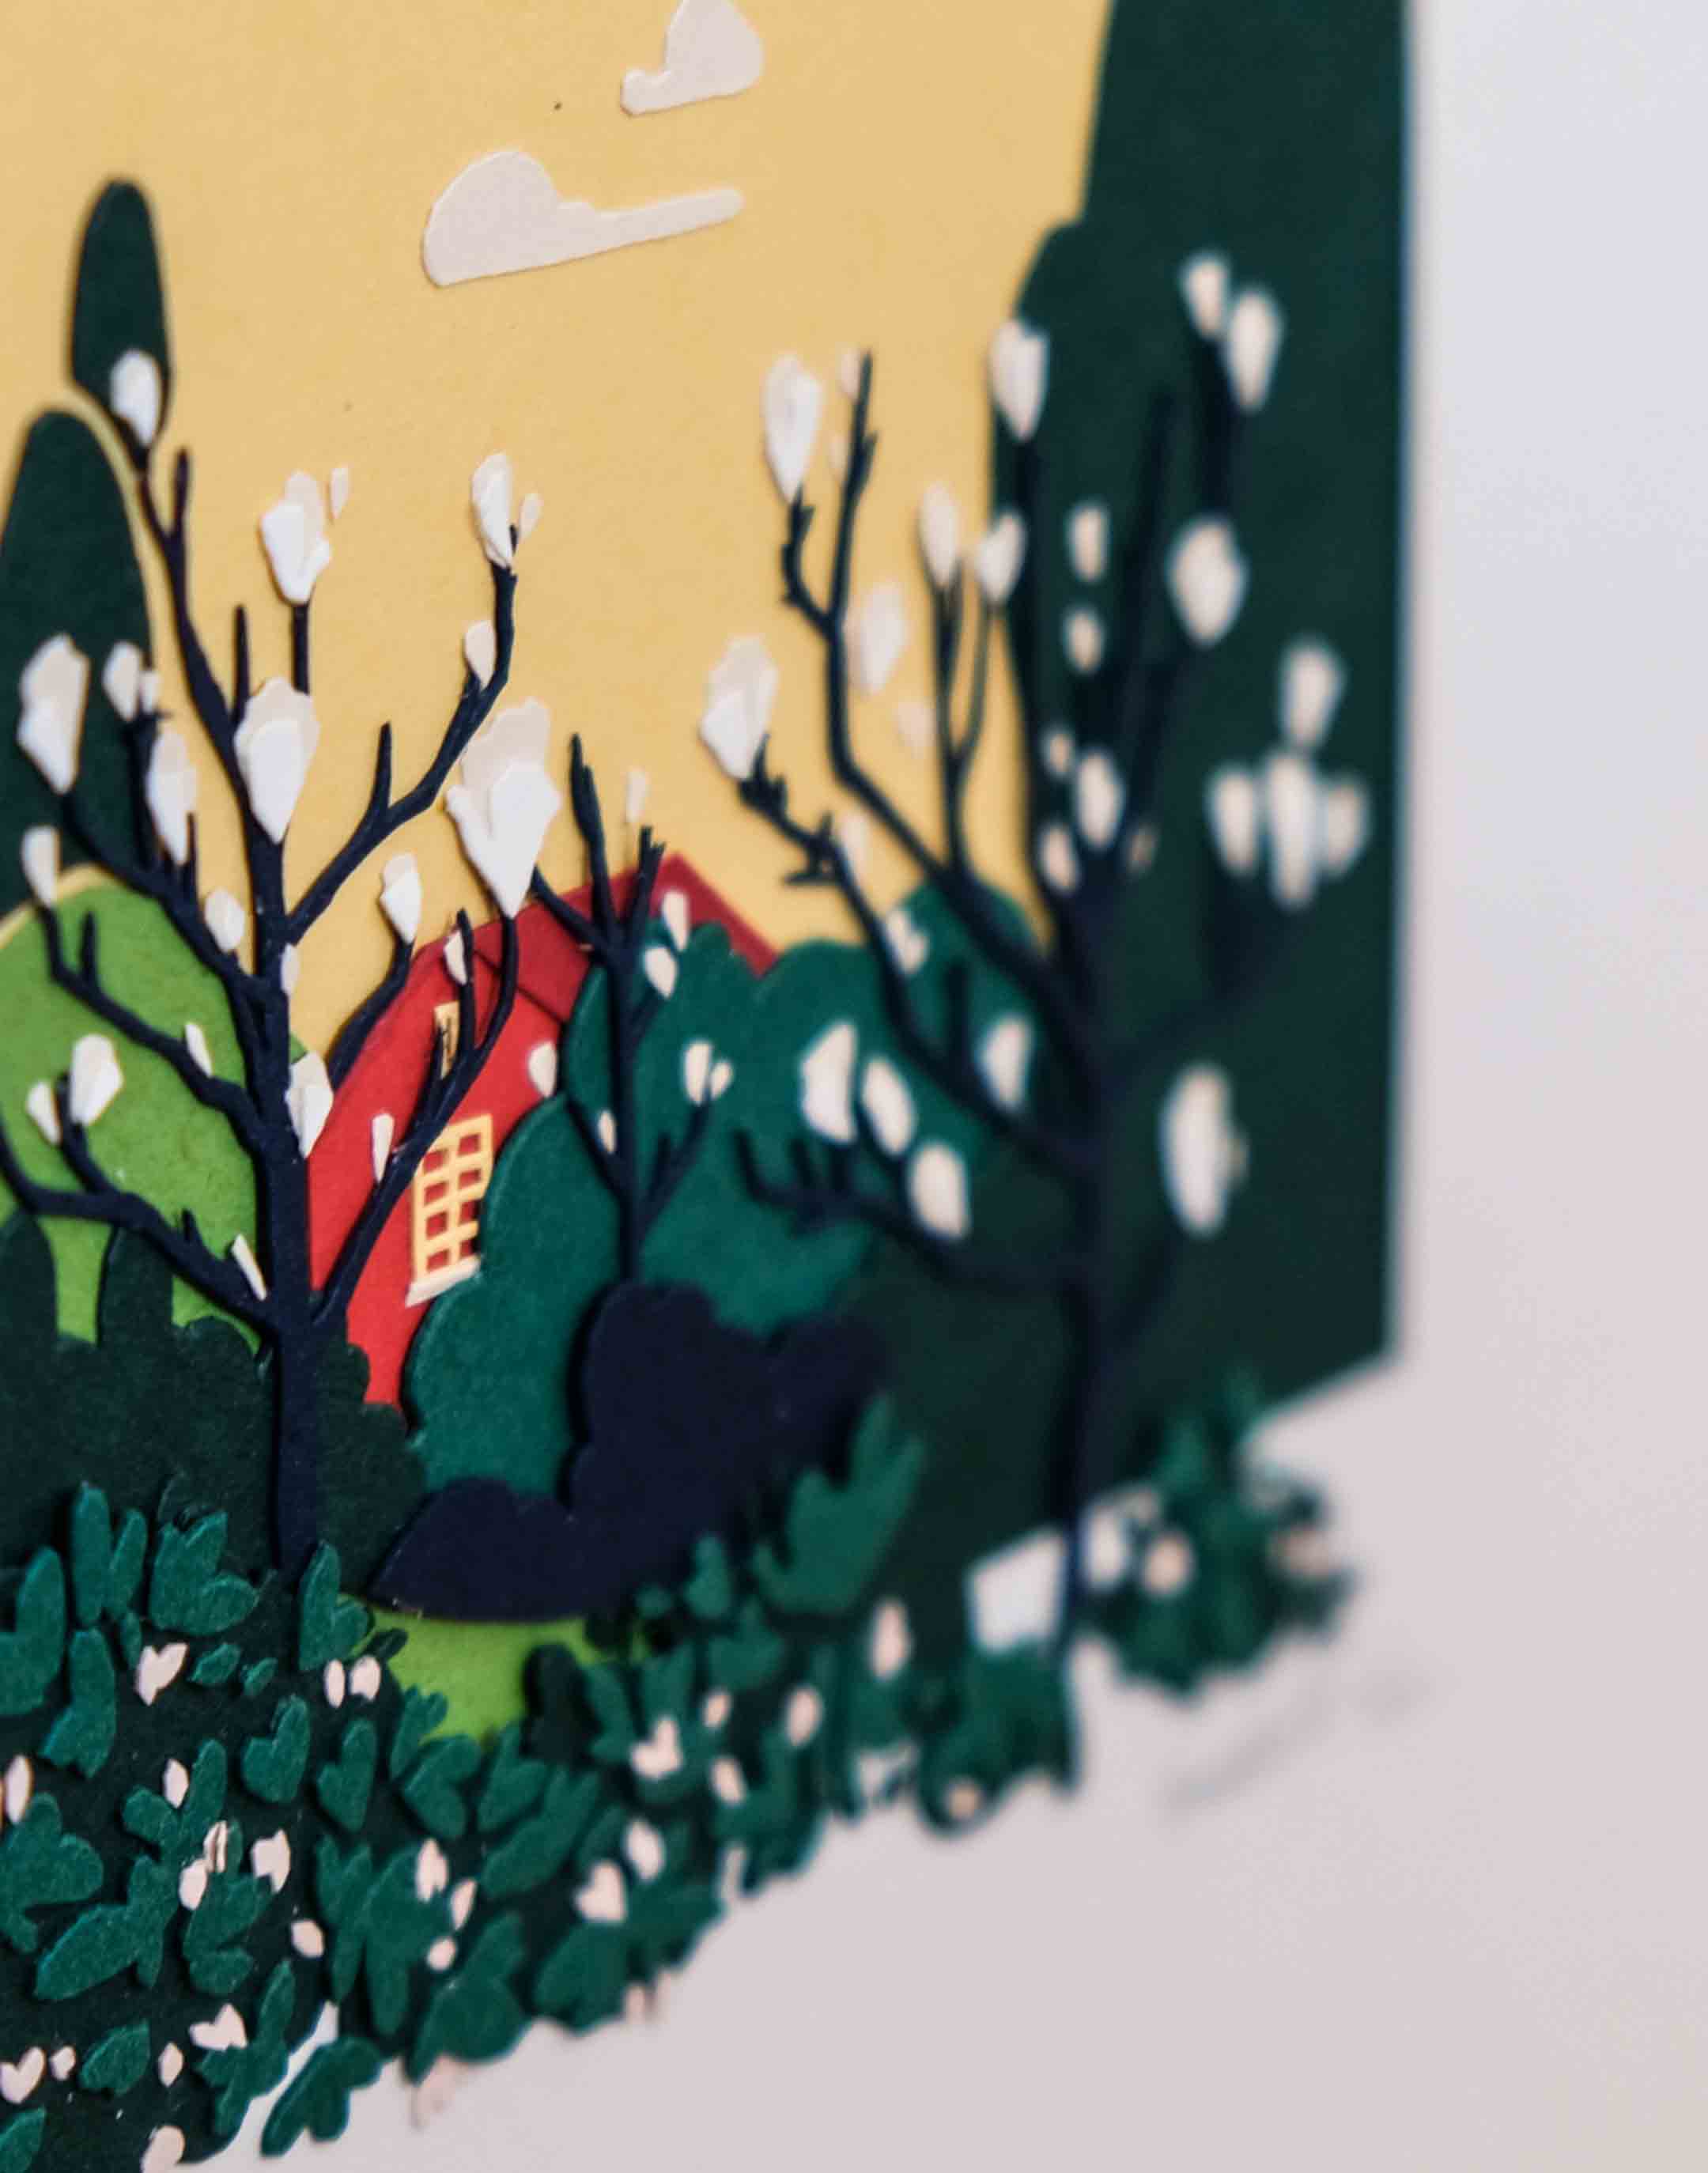 A close-up of the artwork shows the layers of paper that make up the house, magnolia blossoms, and trees.